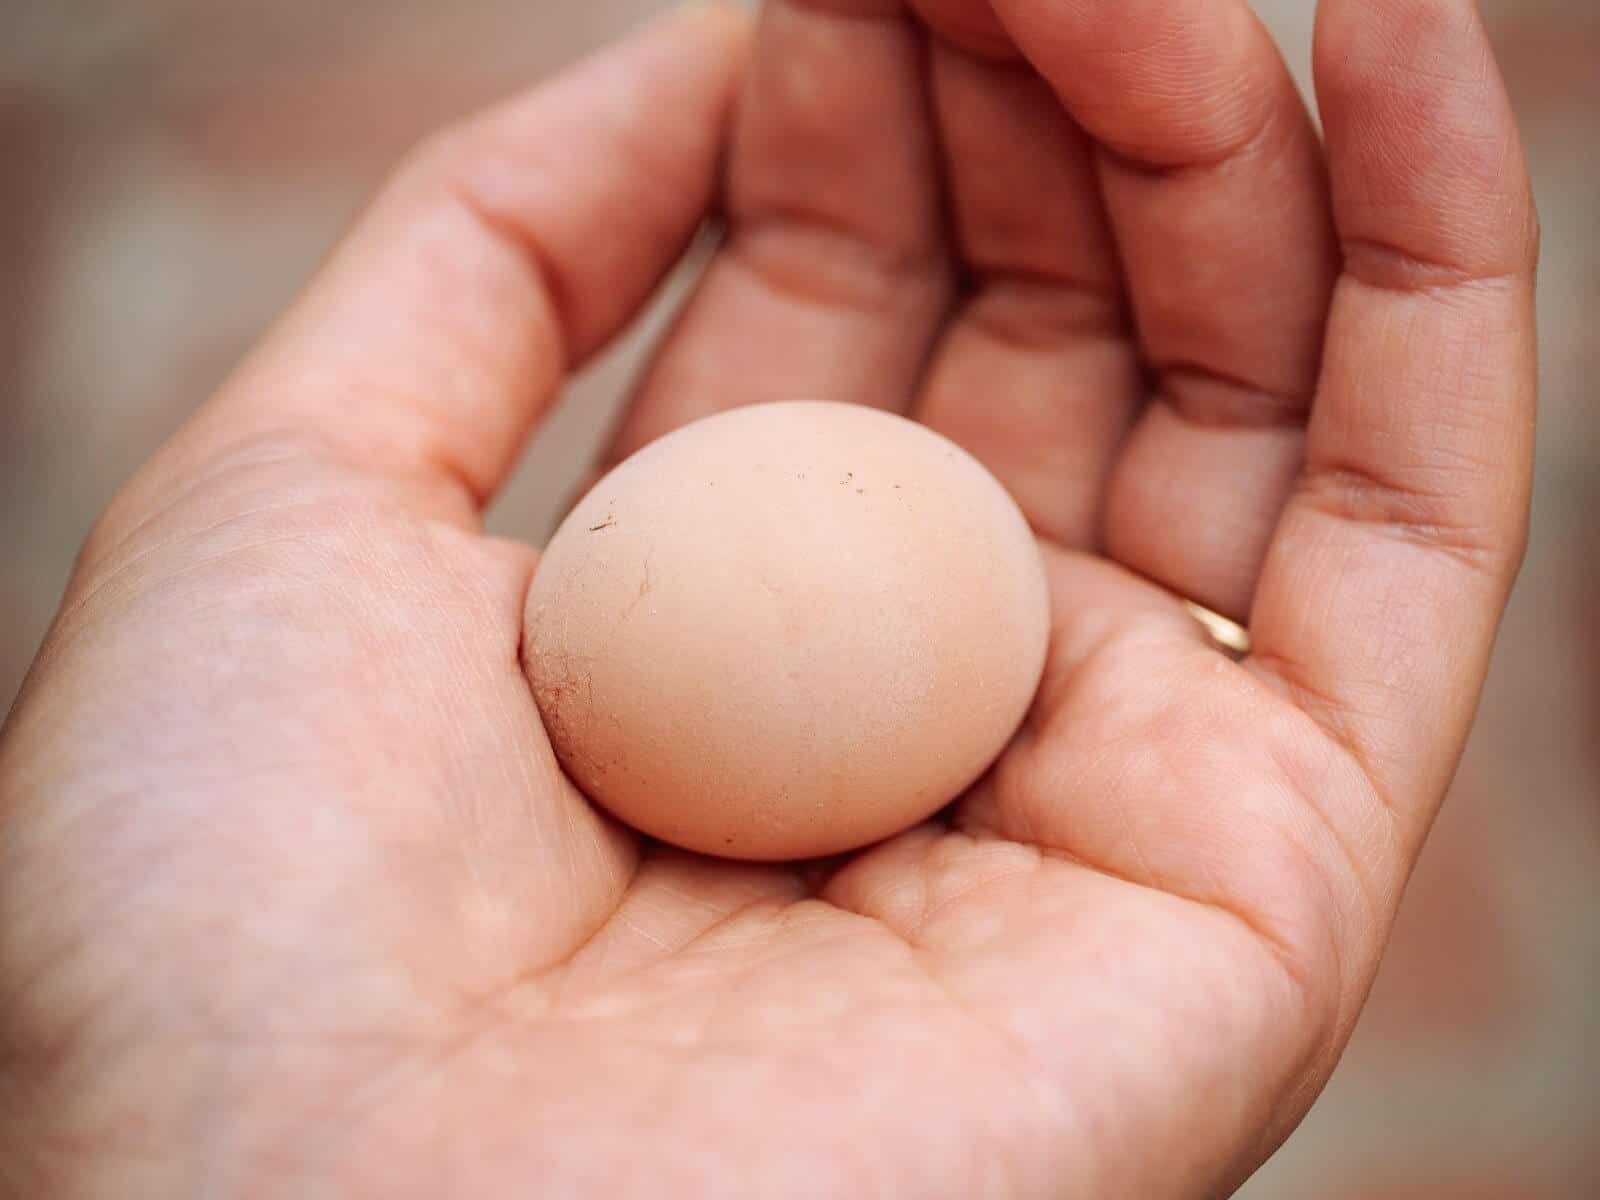 Fart eggs (also known as fairy eggs or witch eggs) are abnormally sized chicken eggs